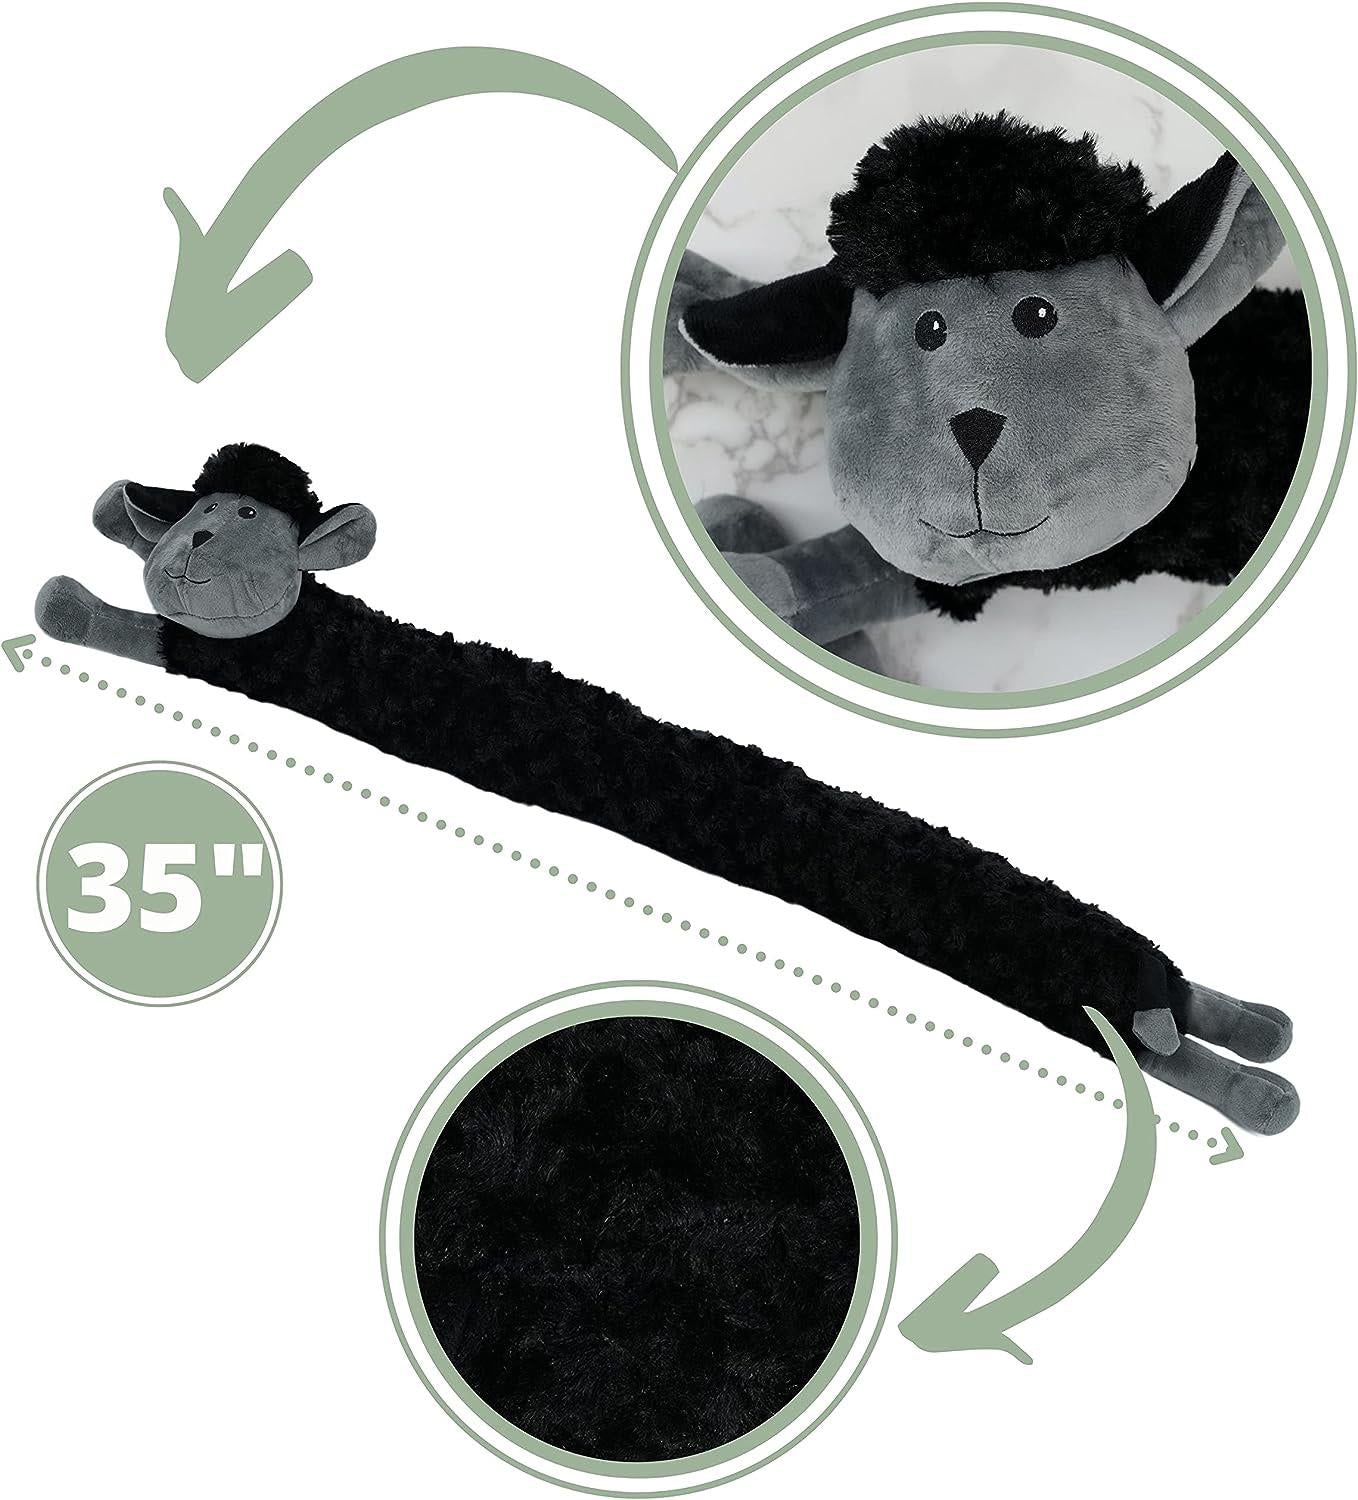 Novelty Black Sheep Excluder by The Magic Toy Shop - The Magic Toy Shop